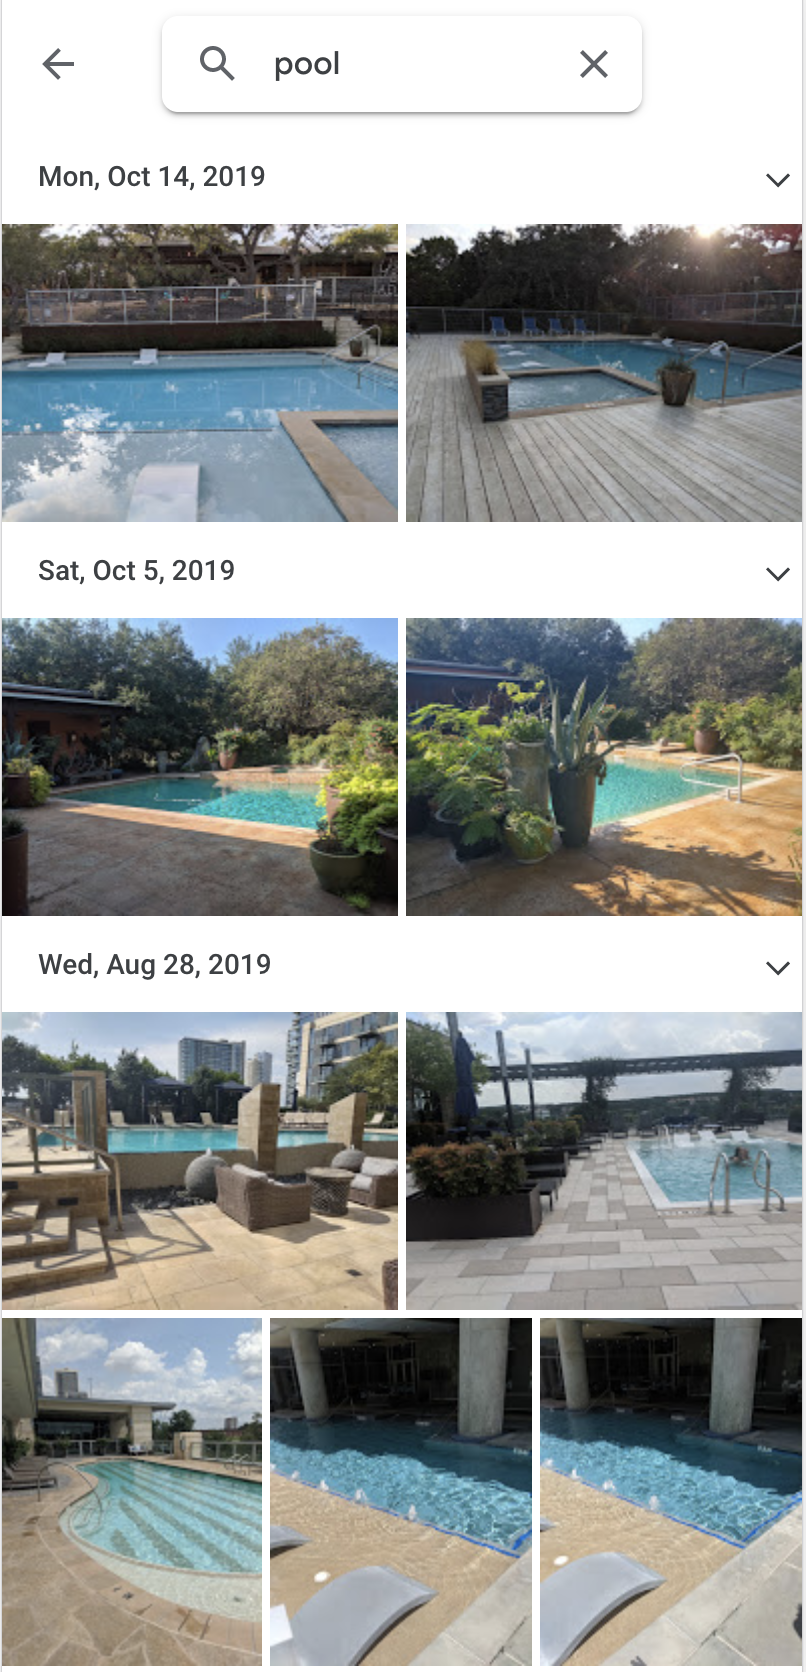 The Google Photo App showing results for the query "pool".